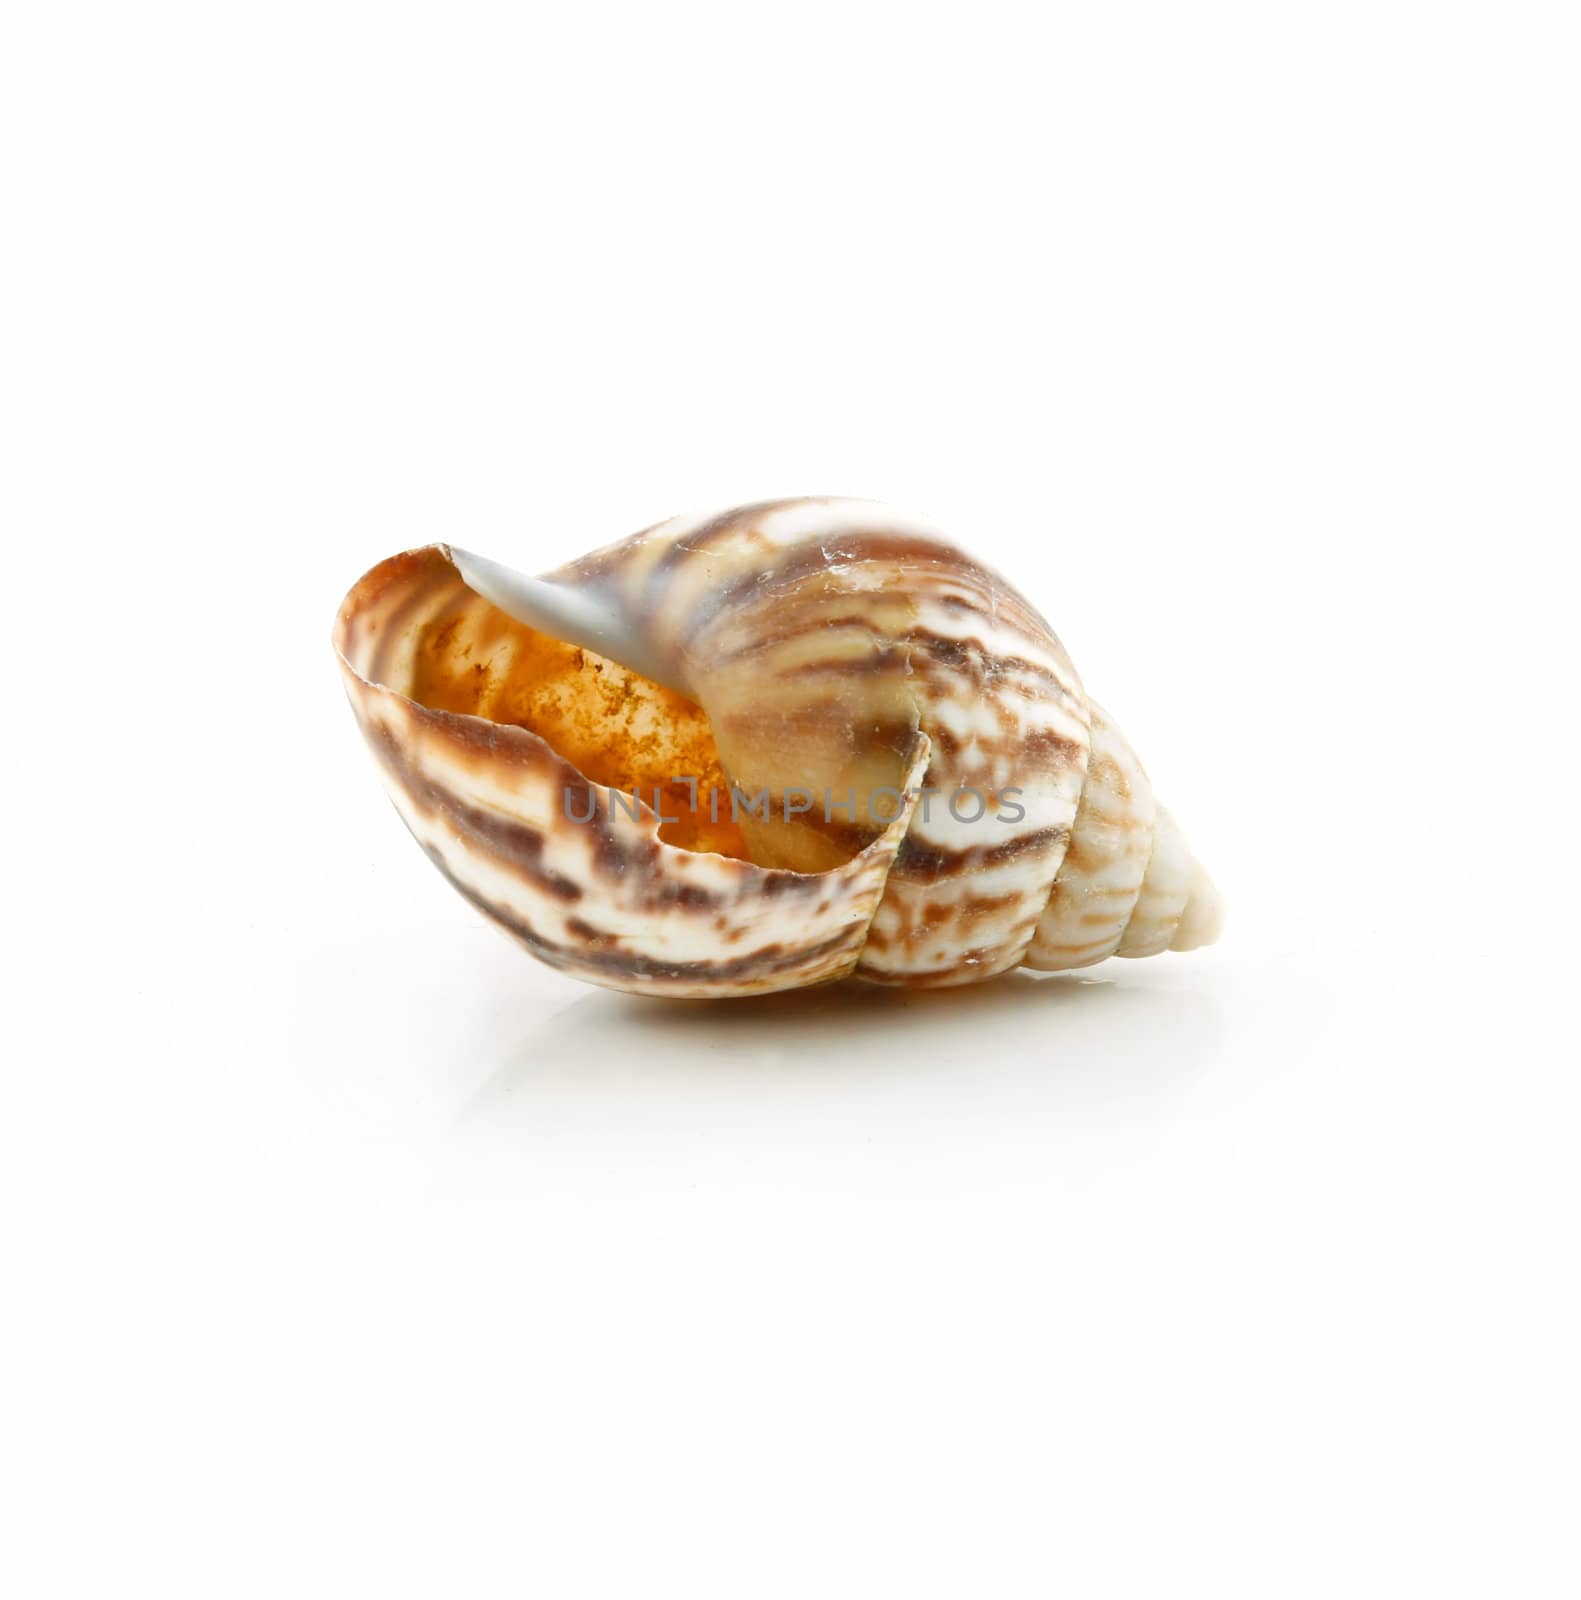 Colored Seashell Scallop Isolated on White Background